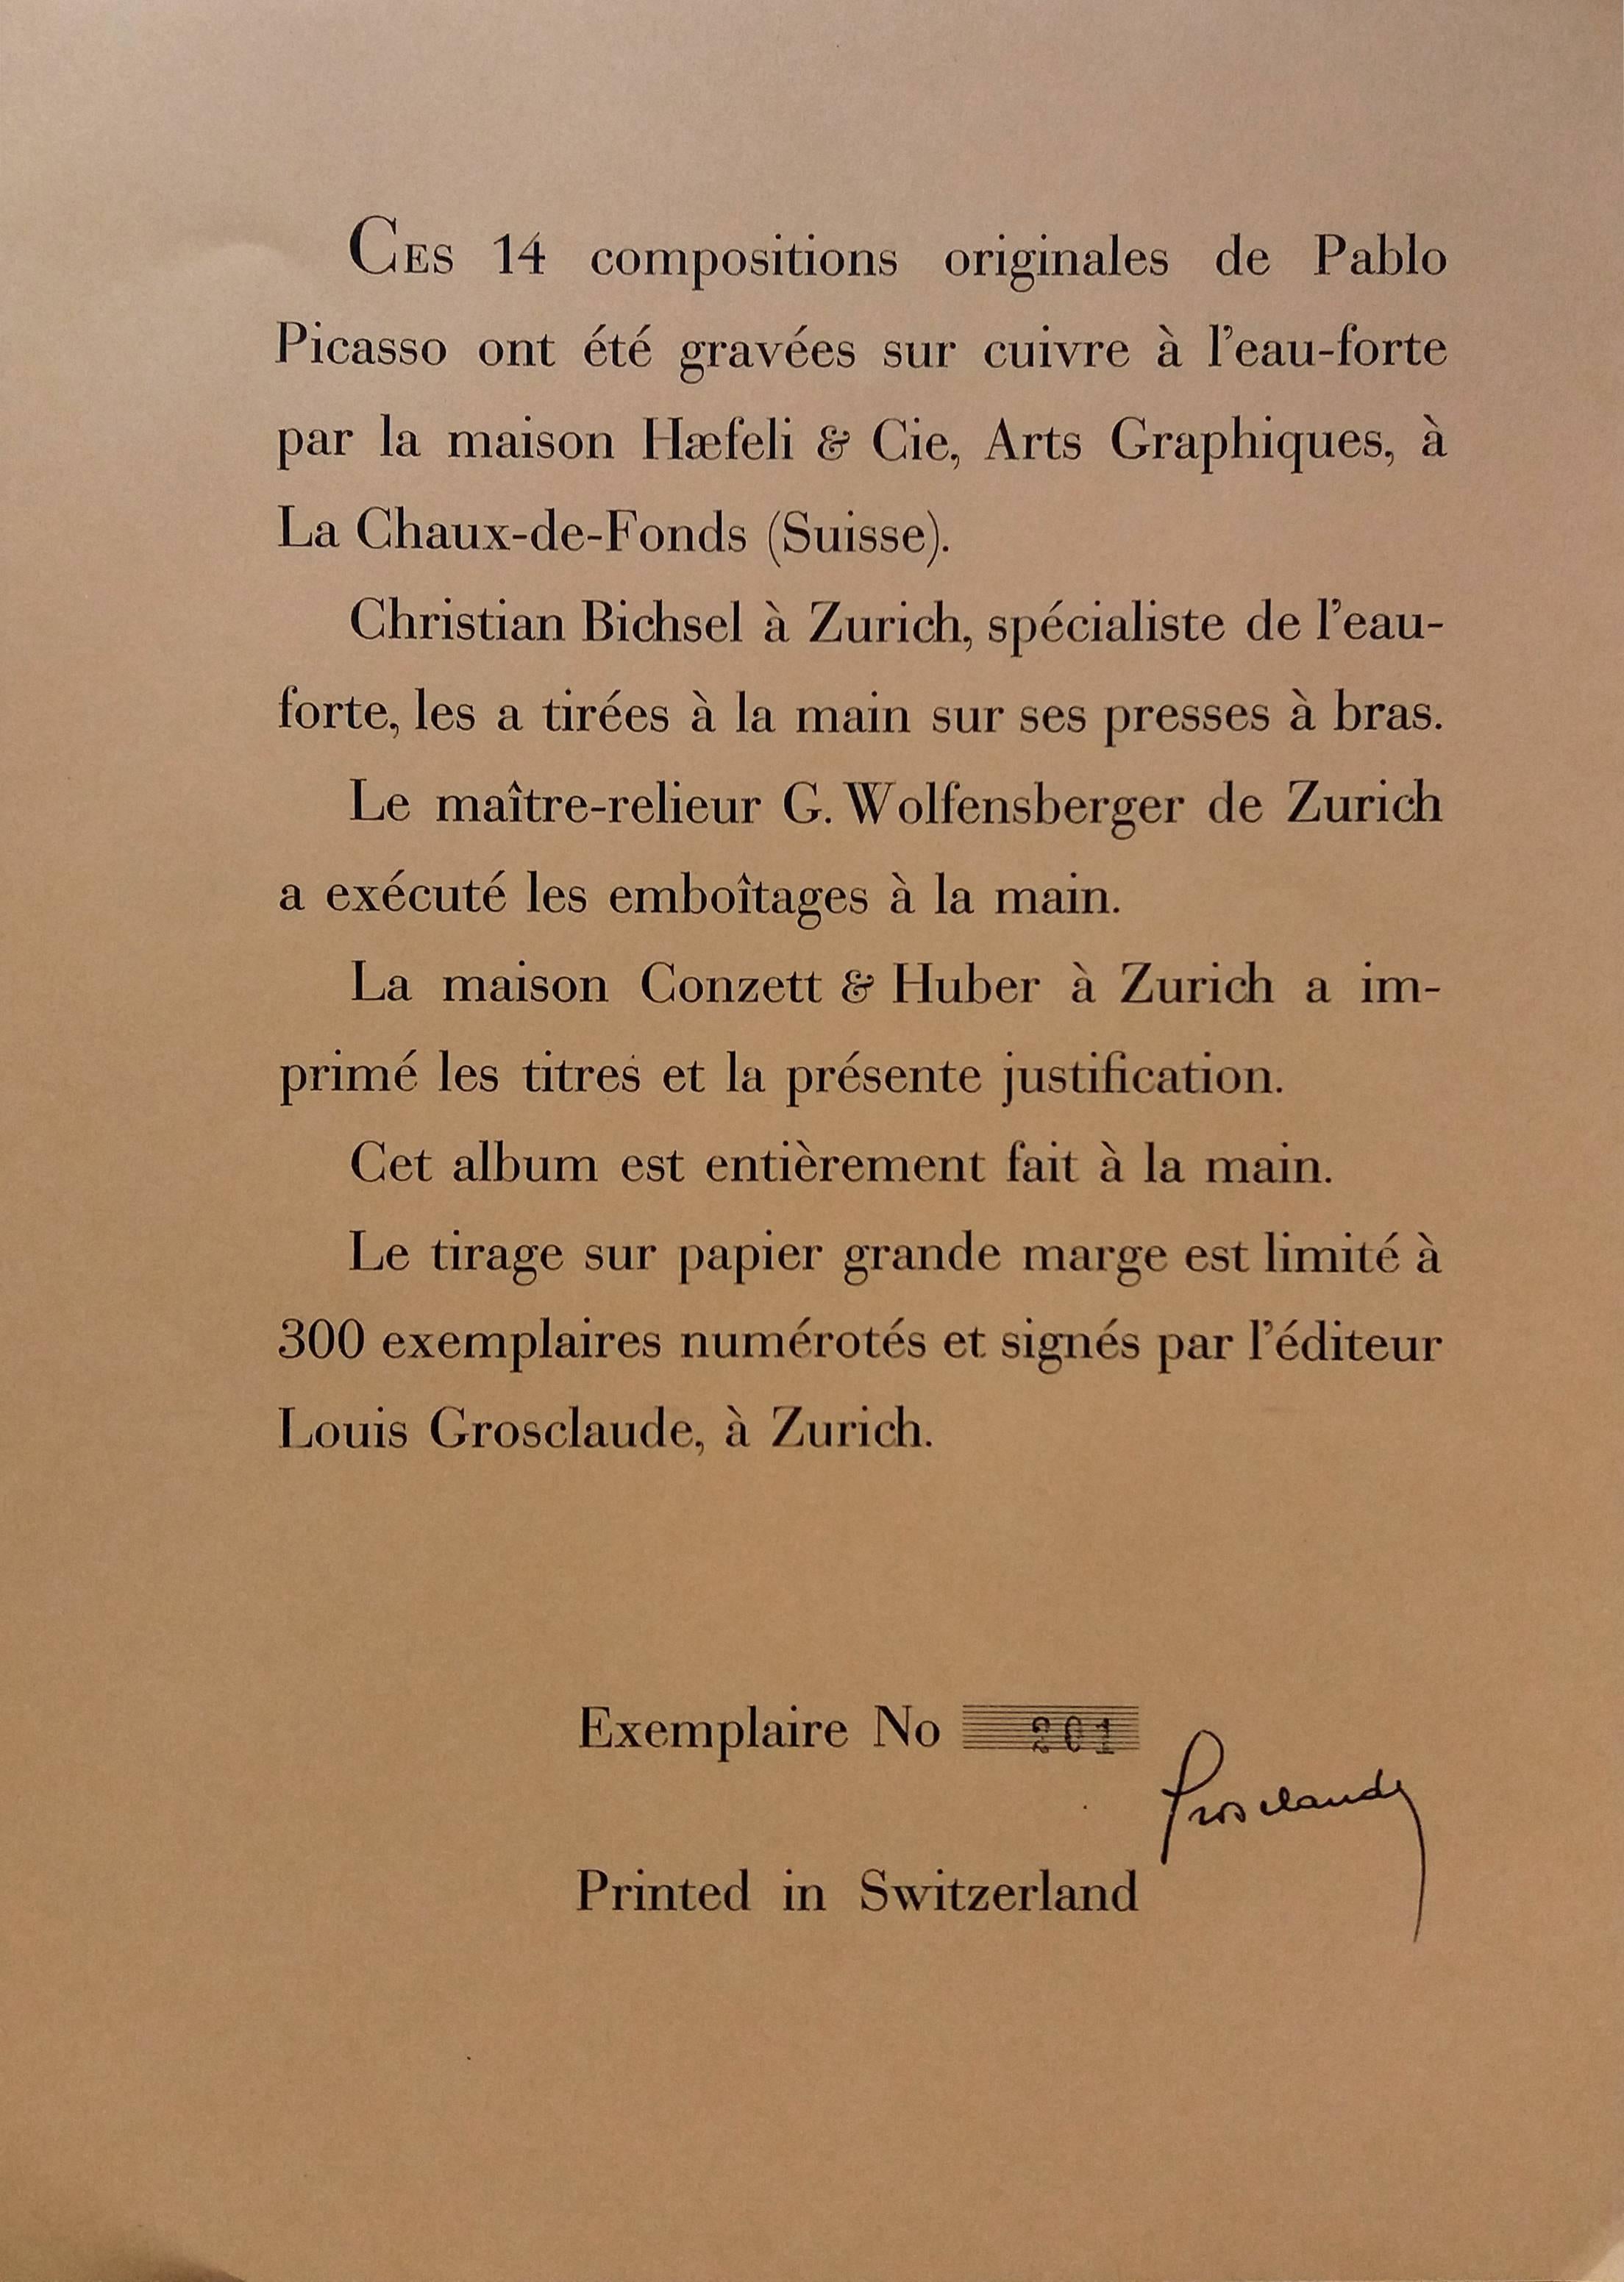 One of the fourteen magnificent original sketches engraved on copper of 1943.
Signed in the plate by the artist.
Certificate of the Publisher. numbered 201/300.
Printed in Switzerland.
Very good state.

"These 14 original compositions by Pablo